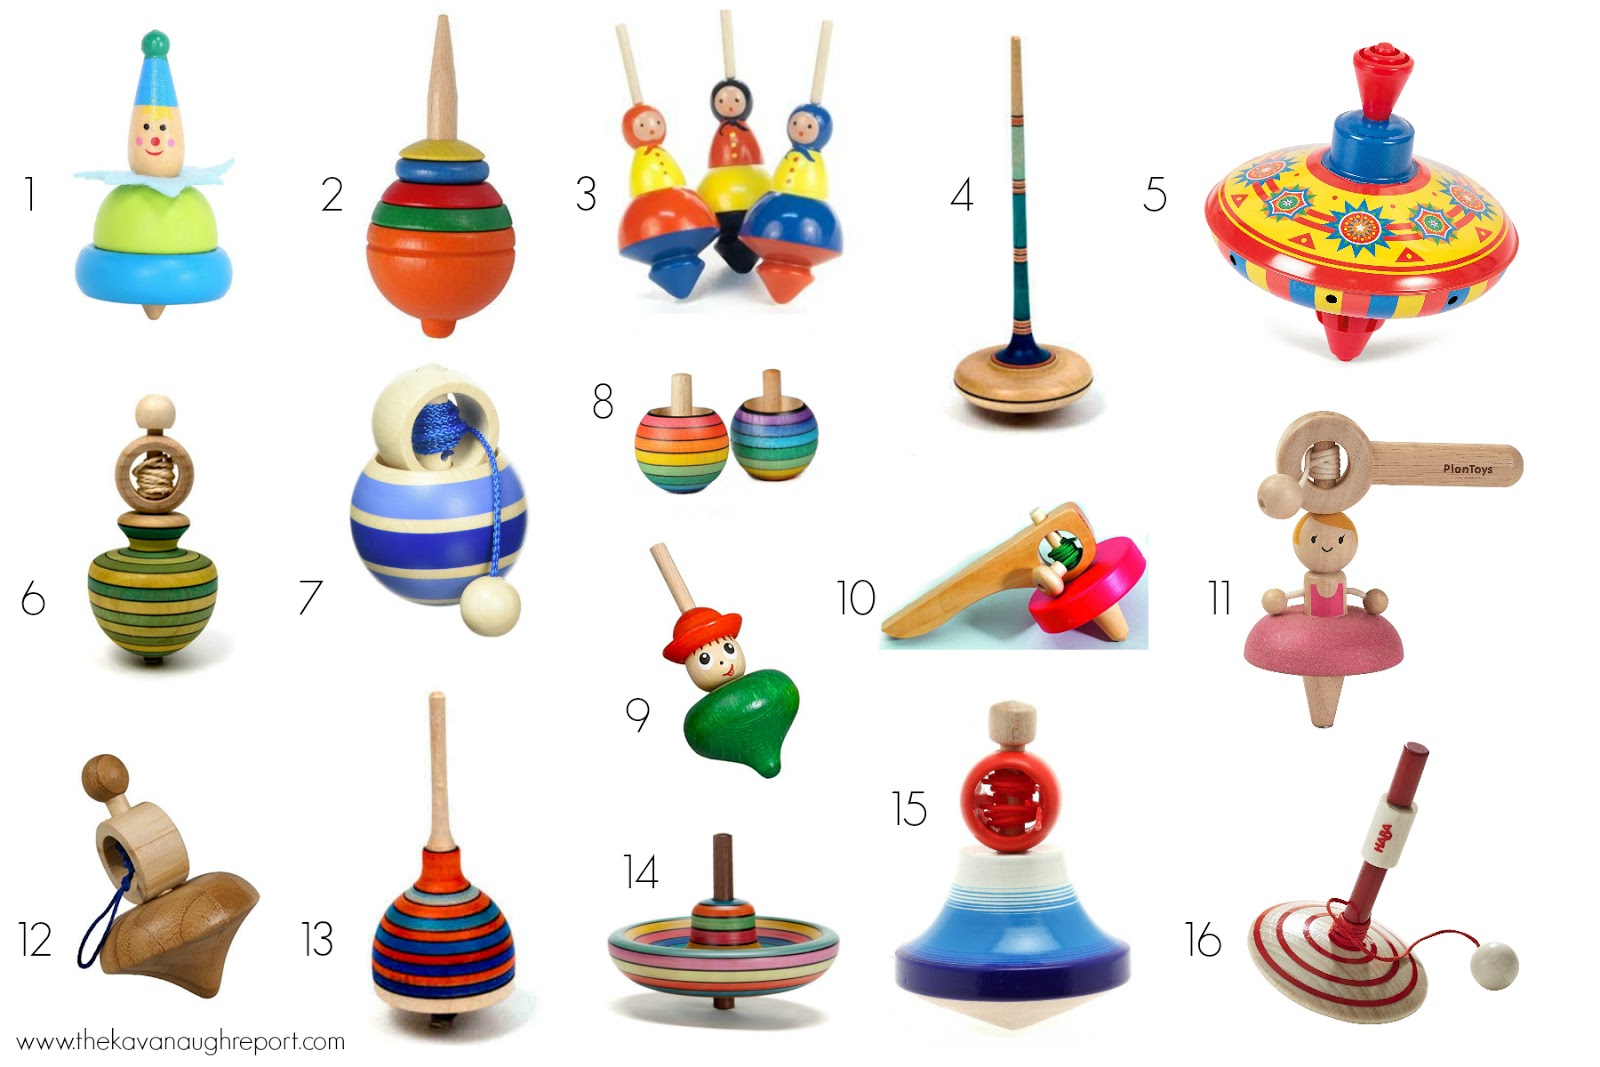 4 Packs Muti Colors and Sizes Spin Tops Stacking or Battling Spin Toys with a Launcher Great Party Gift Favors and Prizes Launcher Novelty Funny Spinning Tops for Kids 